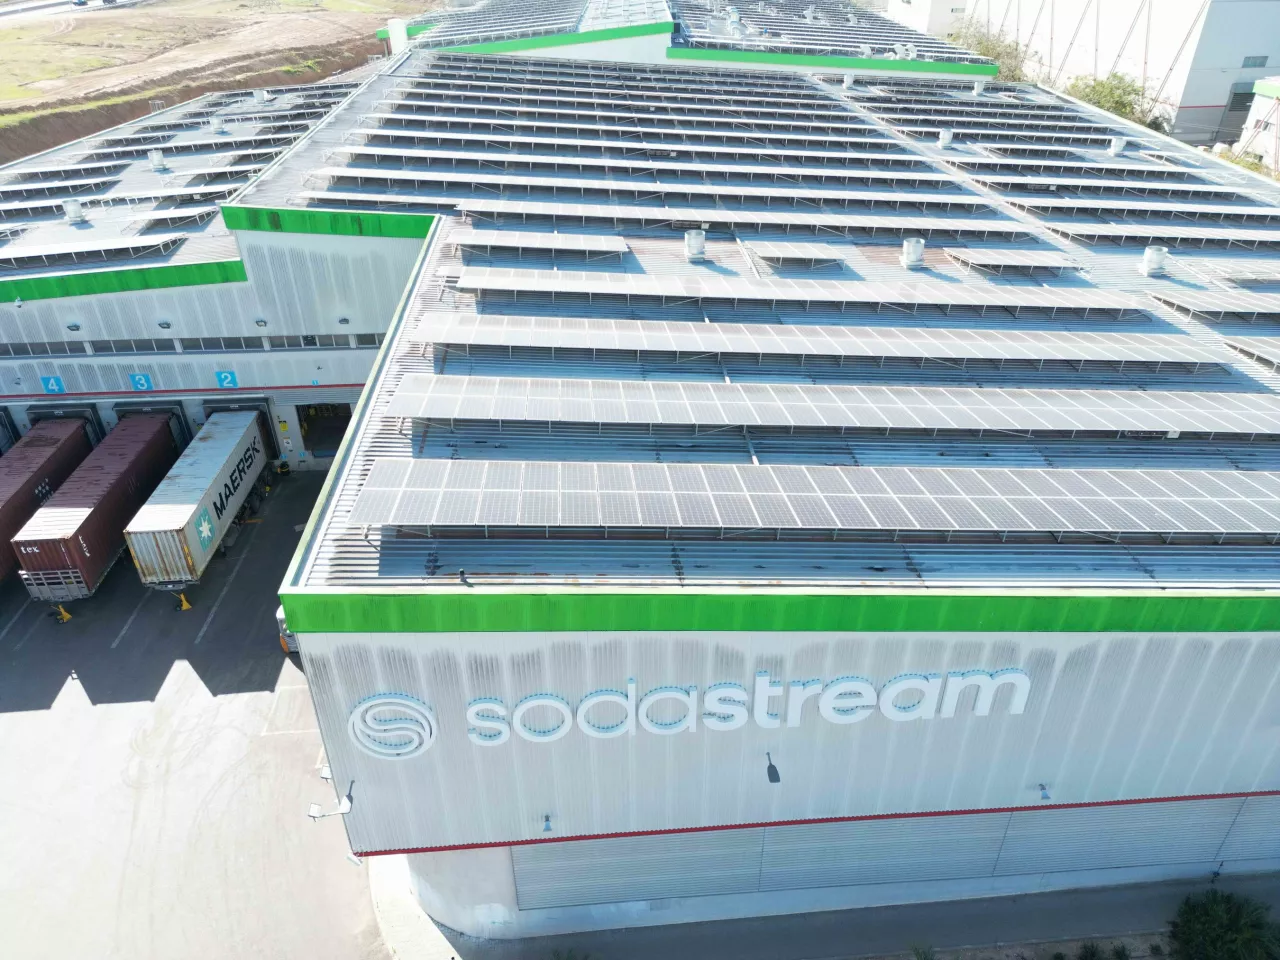 SodaStream Announces 5 Billion Single-Use Bottles Saved in 2022 in New Environmental Campaign